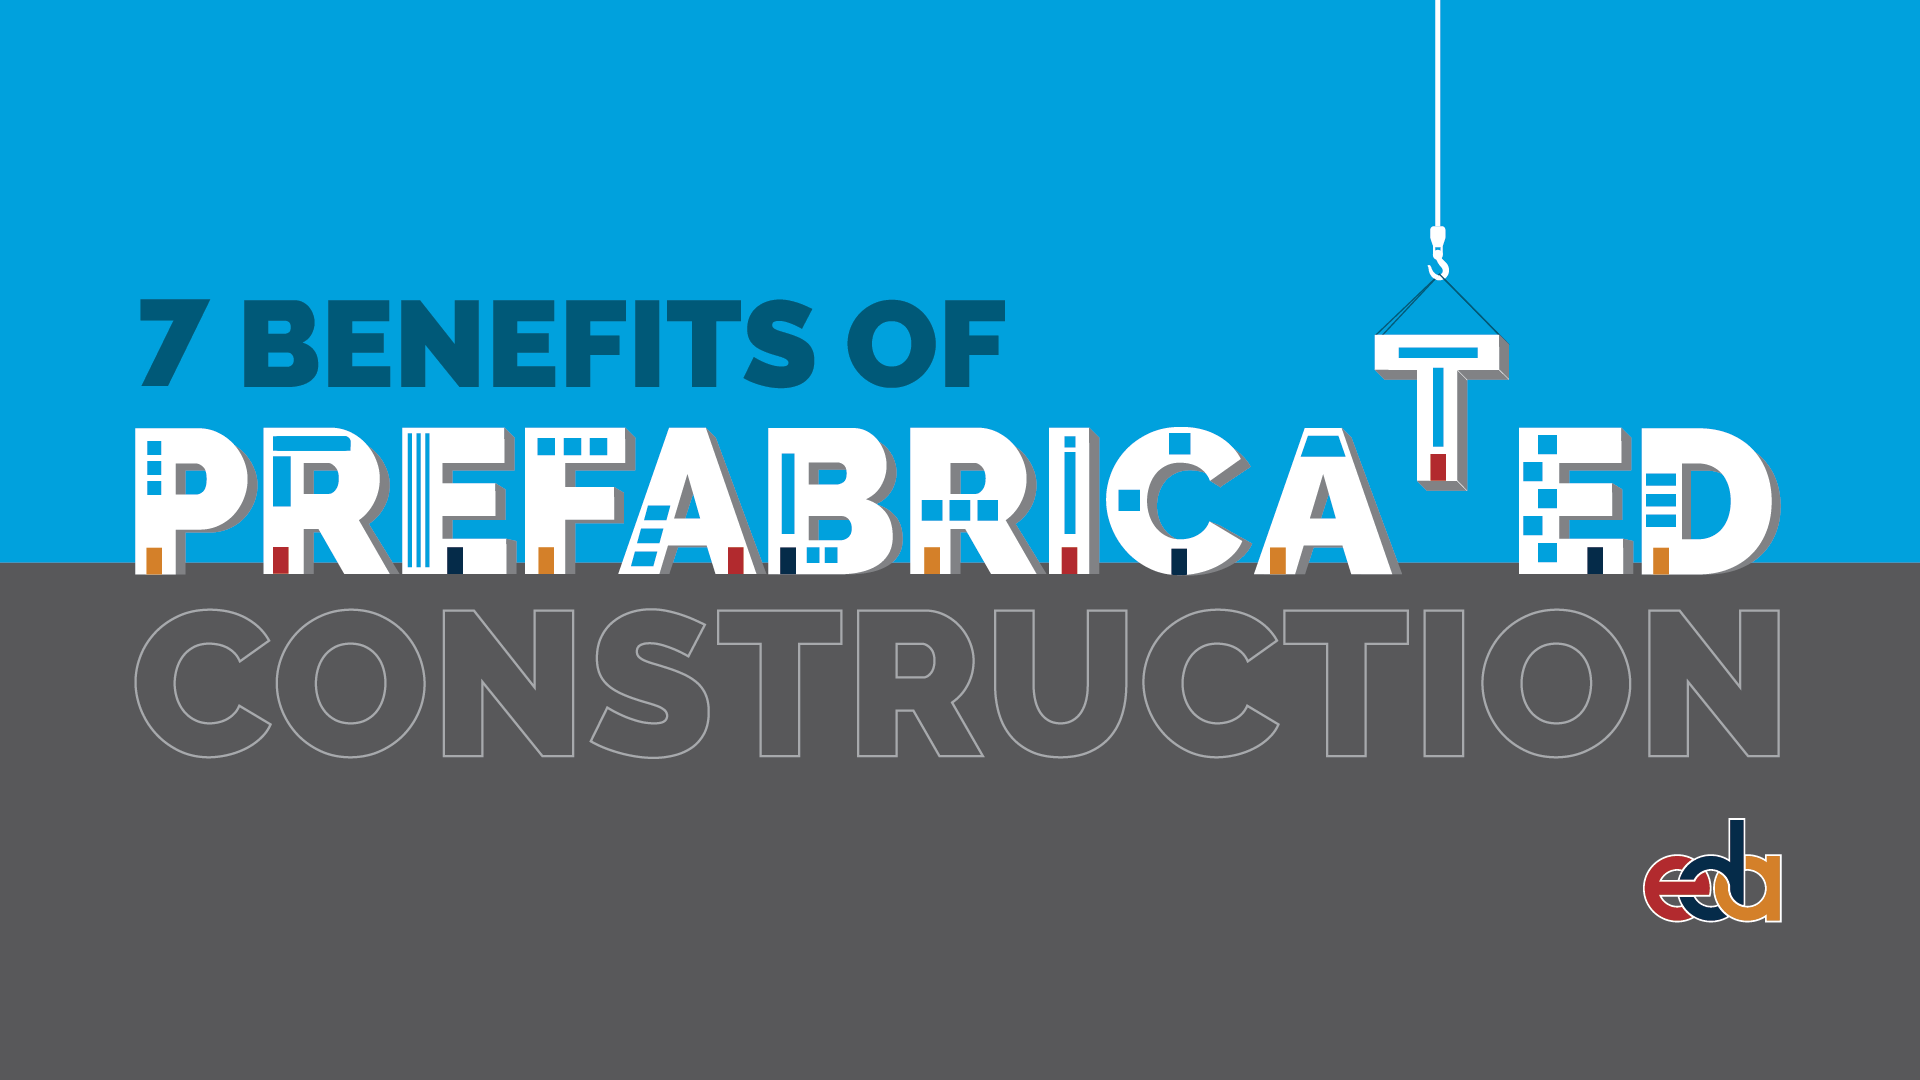 7 Benefits of Prefabricated Construction